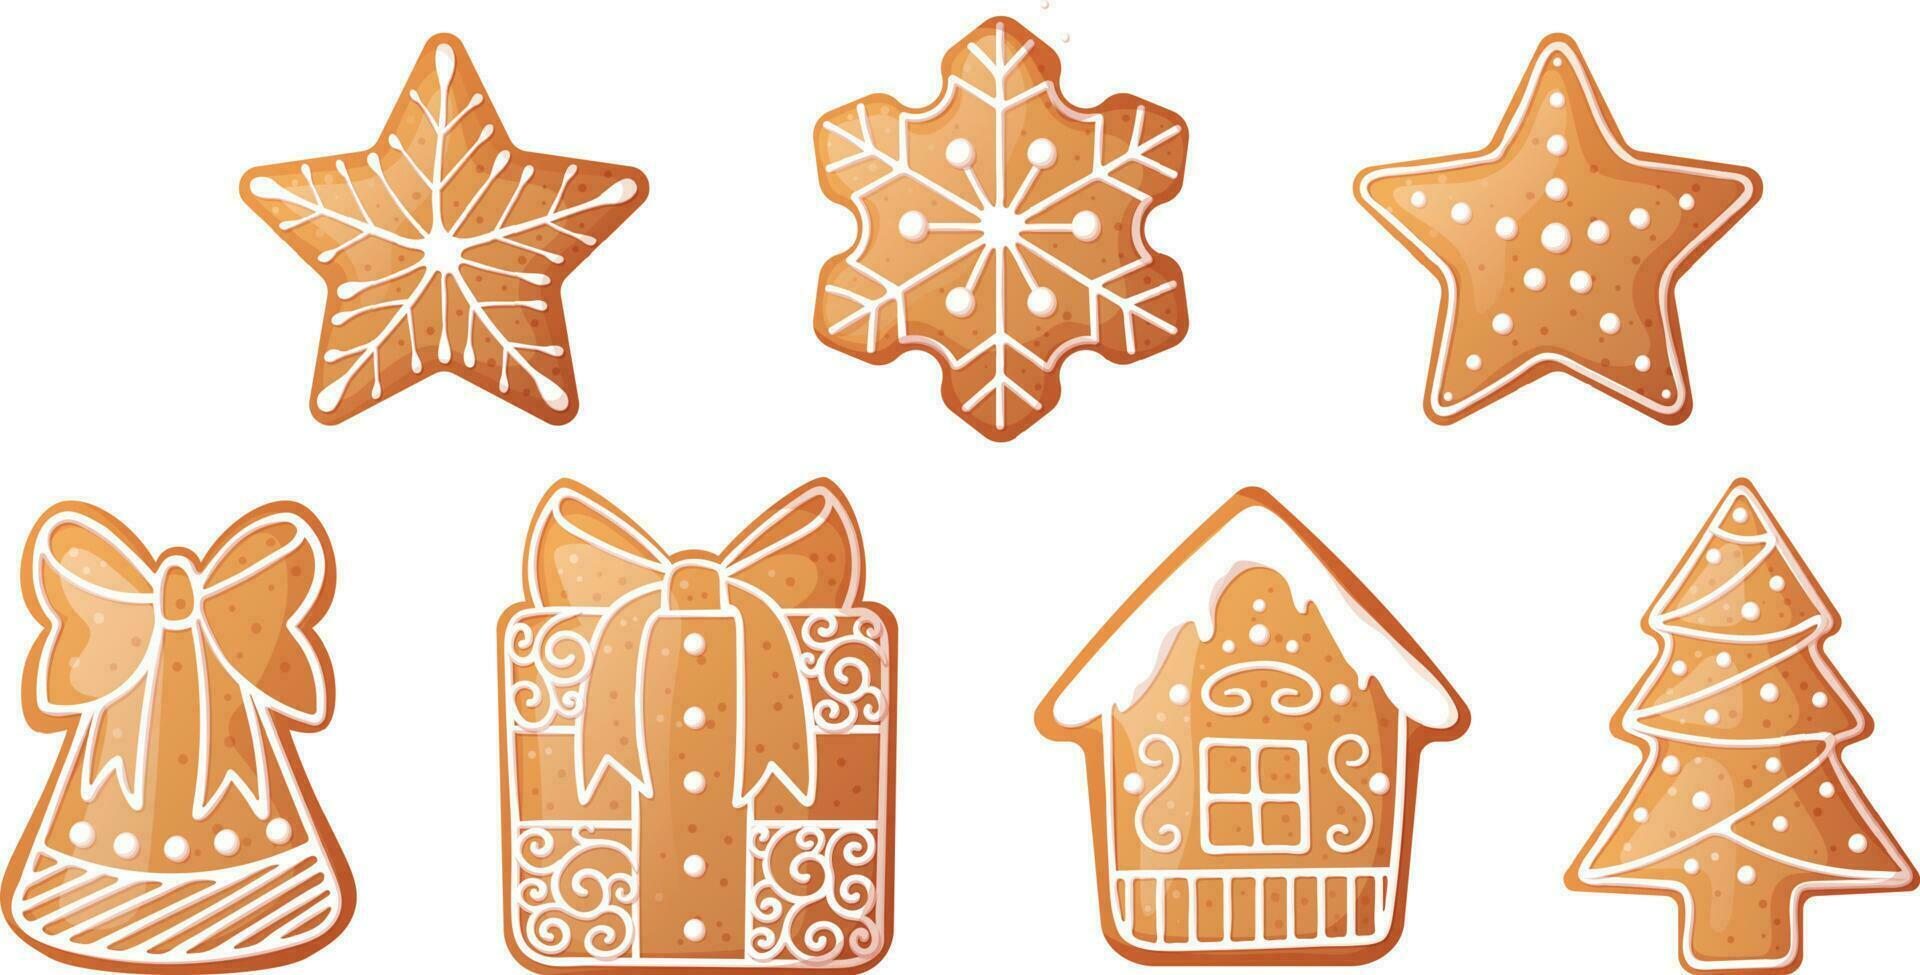 Christmas gingerbread set snowflakes, house, gift, bell, Christmas tree. Vector illustration of holiday cookies